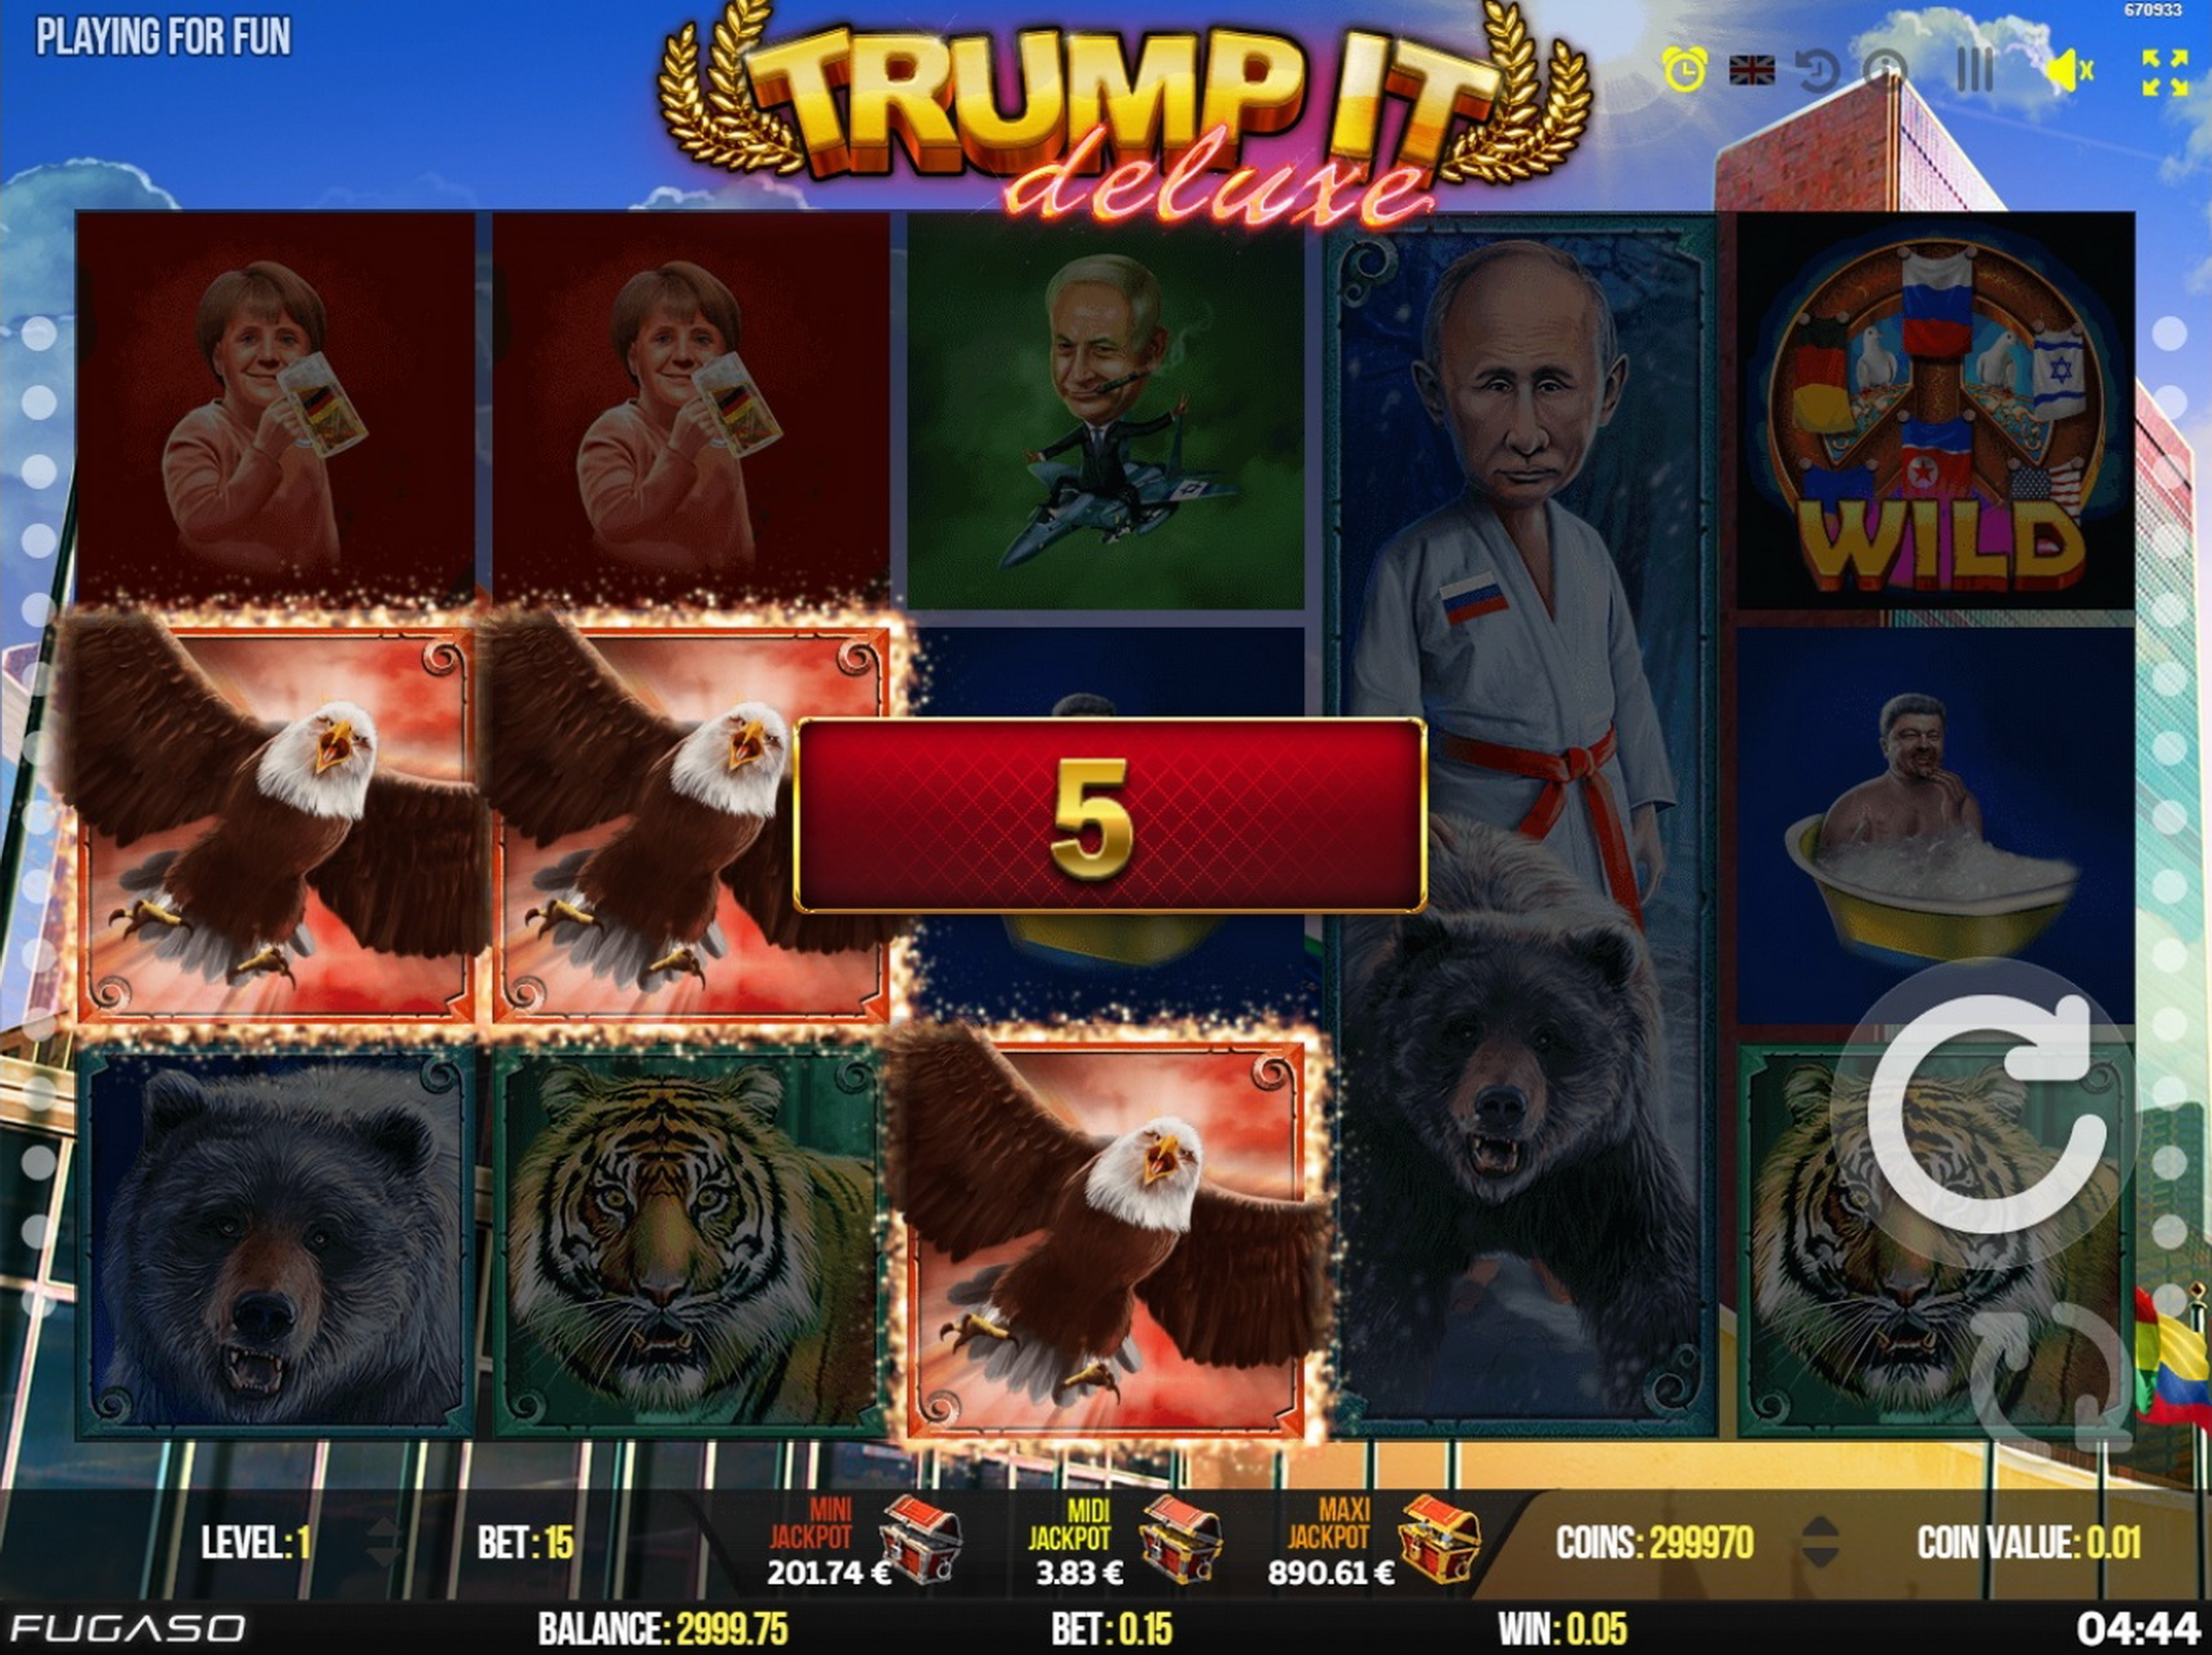 Win Money in Trump It Deluxe Free Slot Game by Fugaso